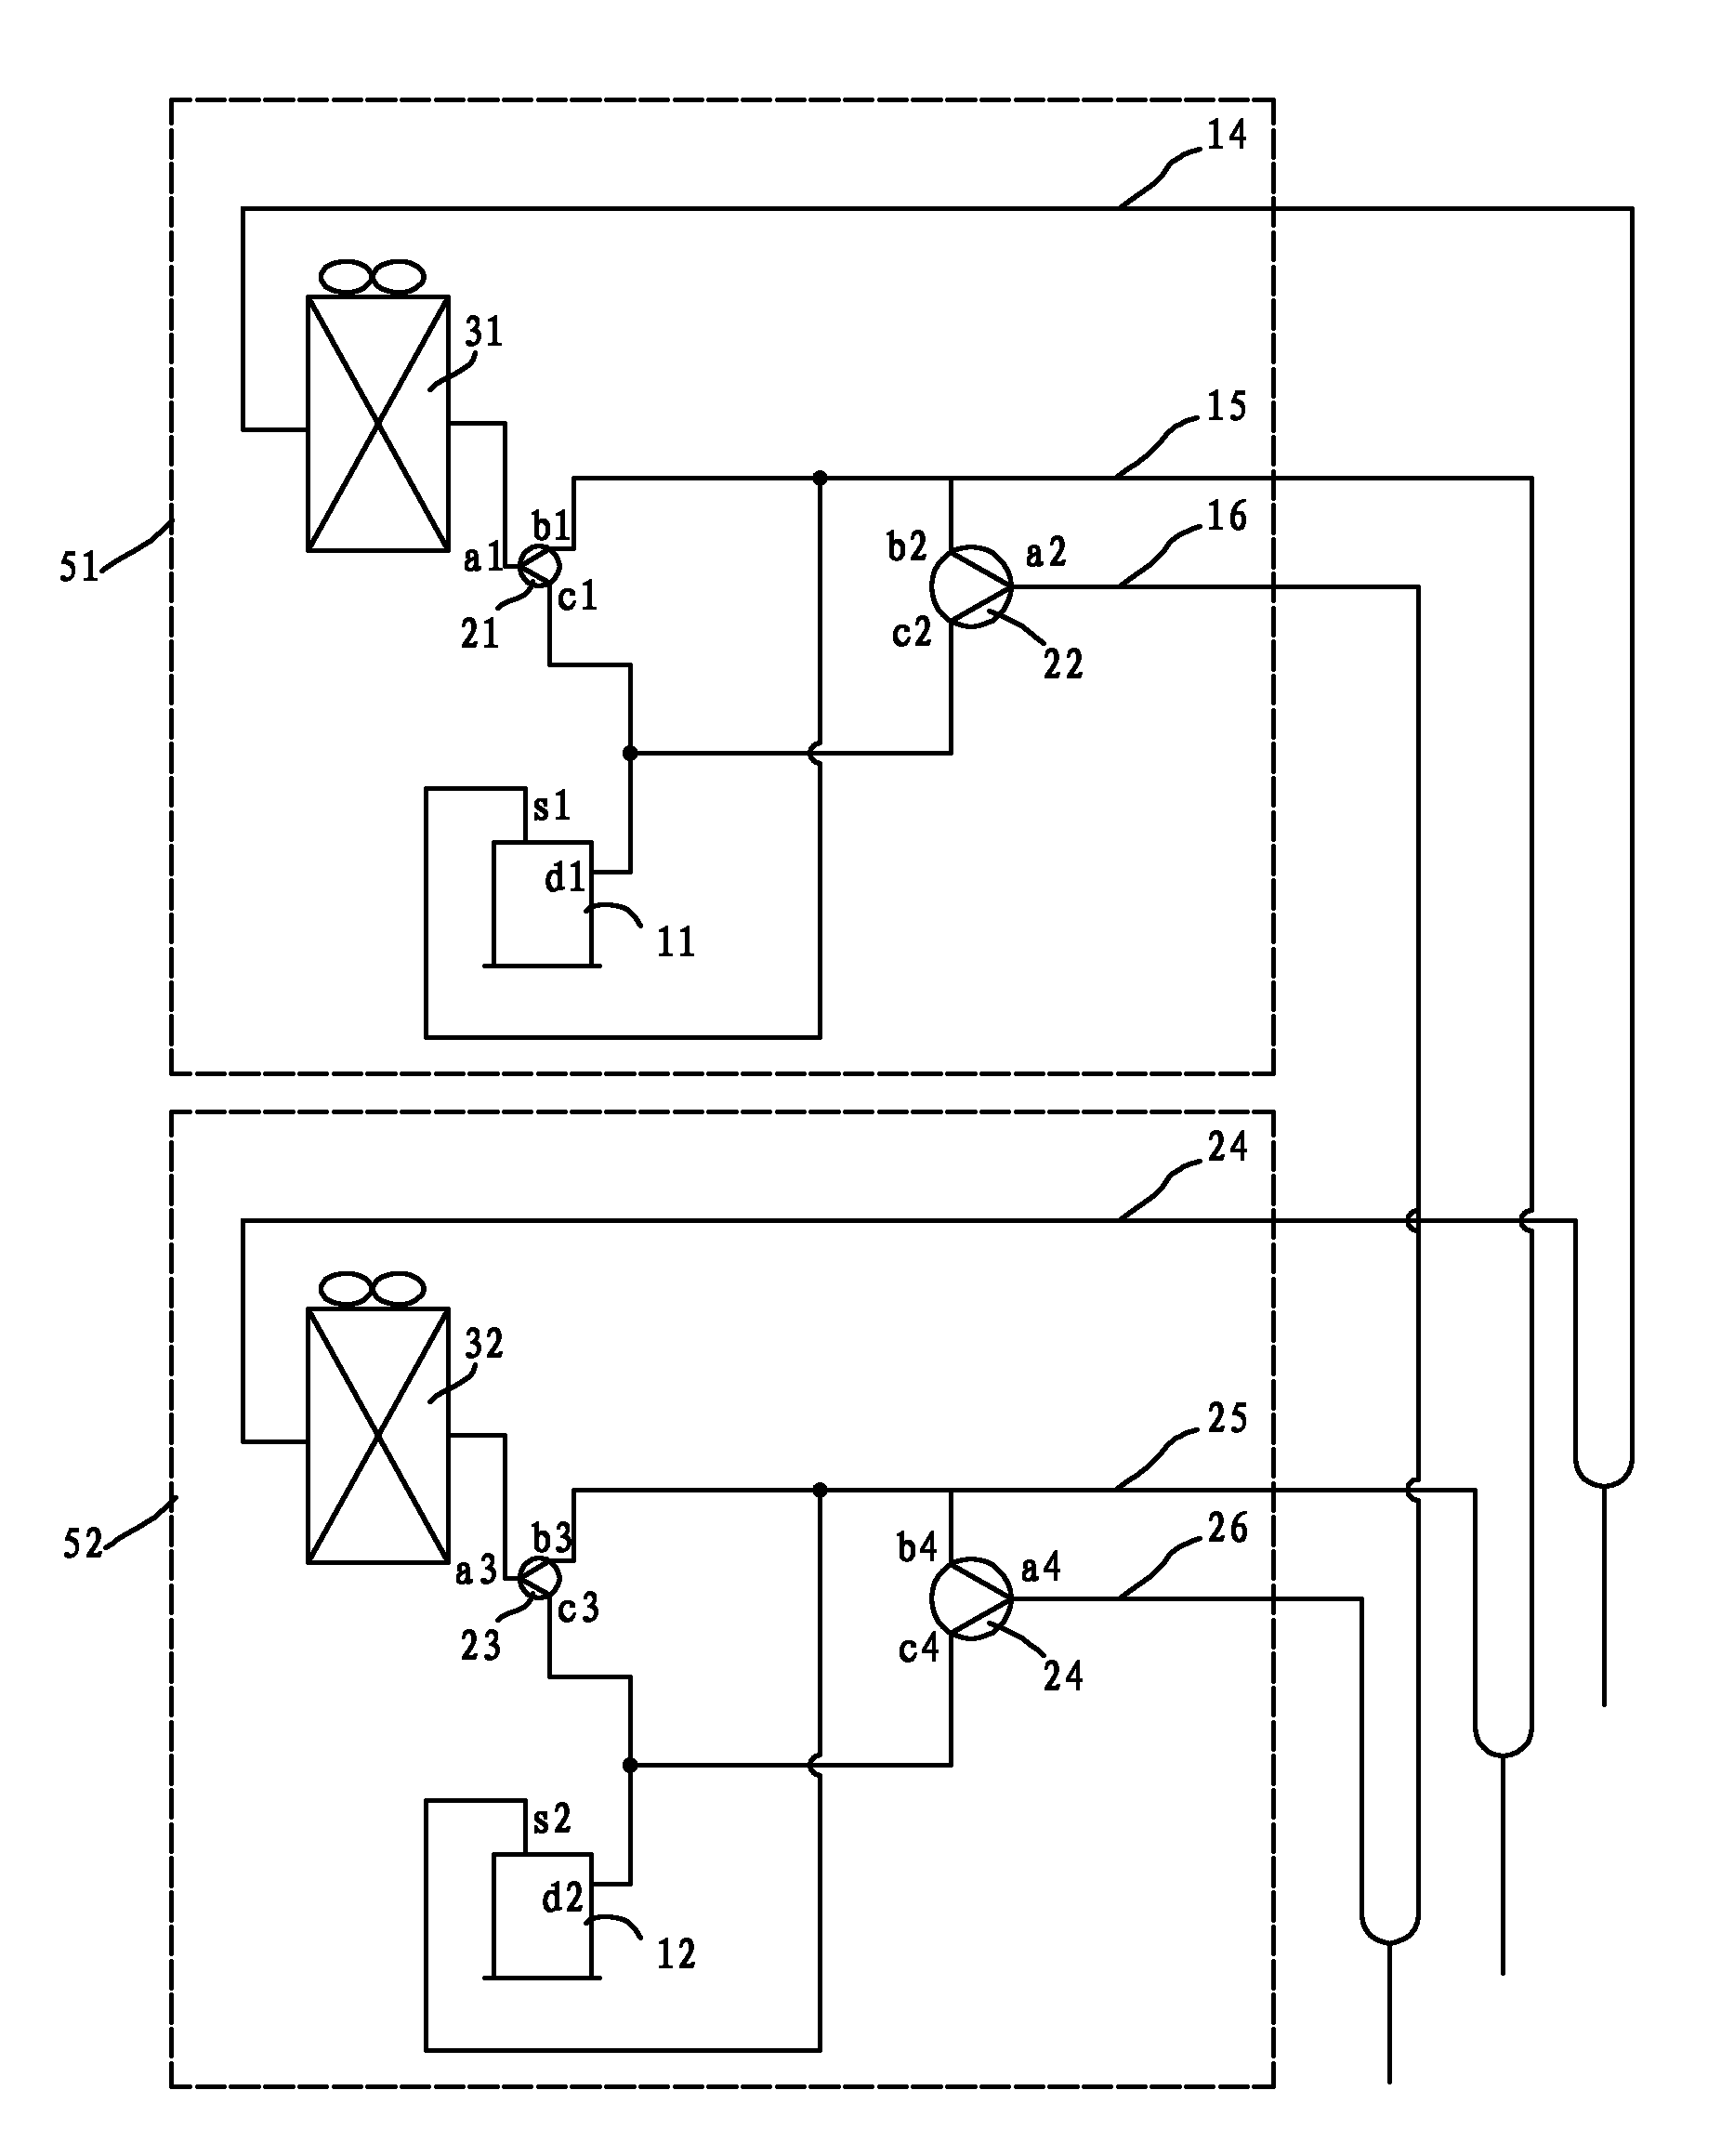 Defrosting method of three-pipe heating recovery system